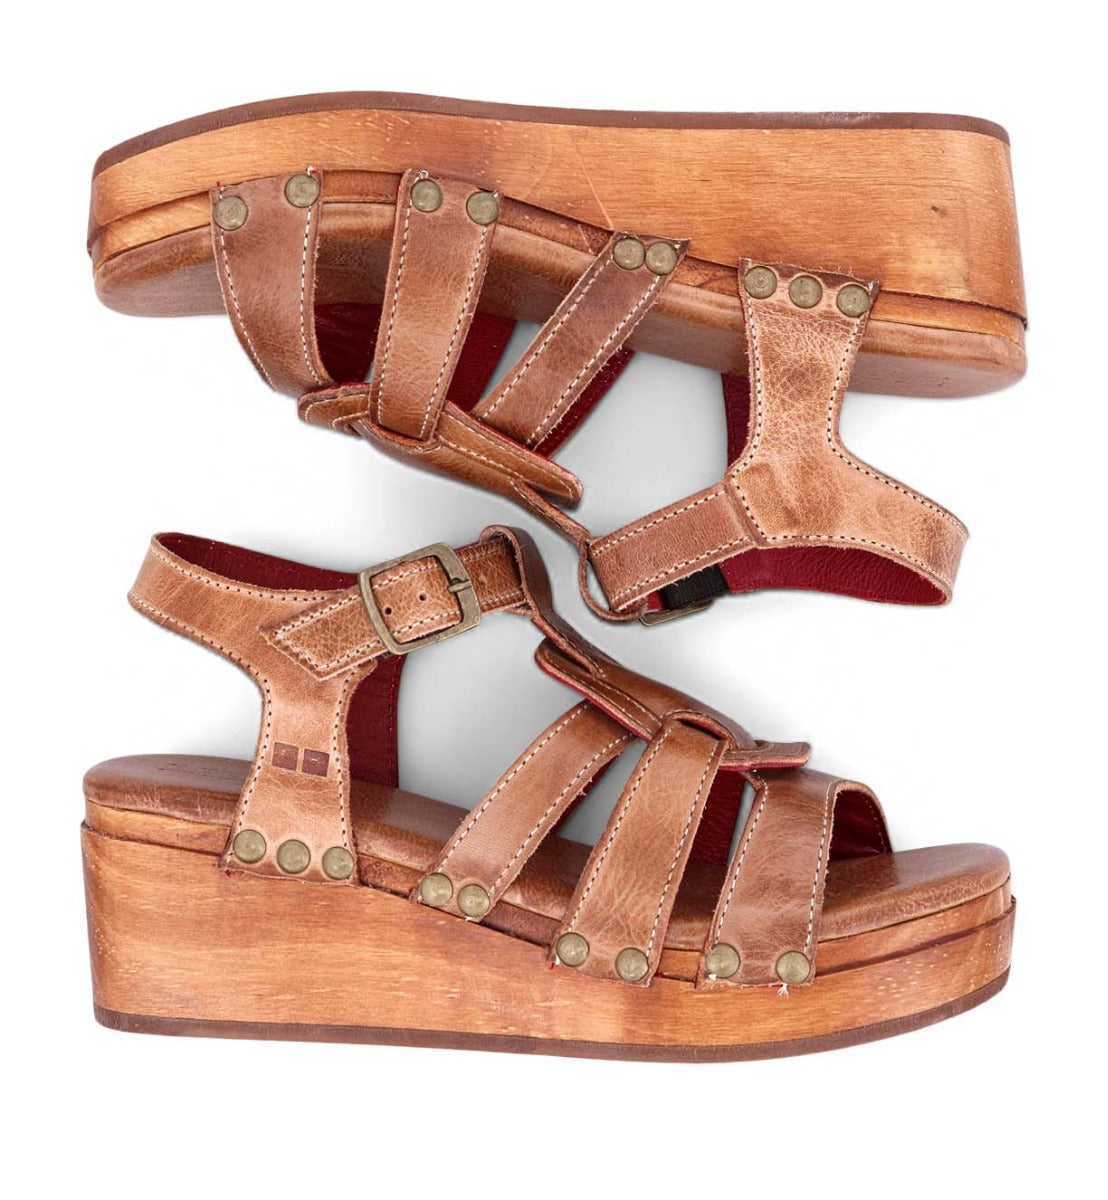 A pair of Fabiola women's sandals with straps and buckles from Bed Stu.